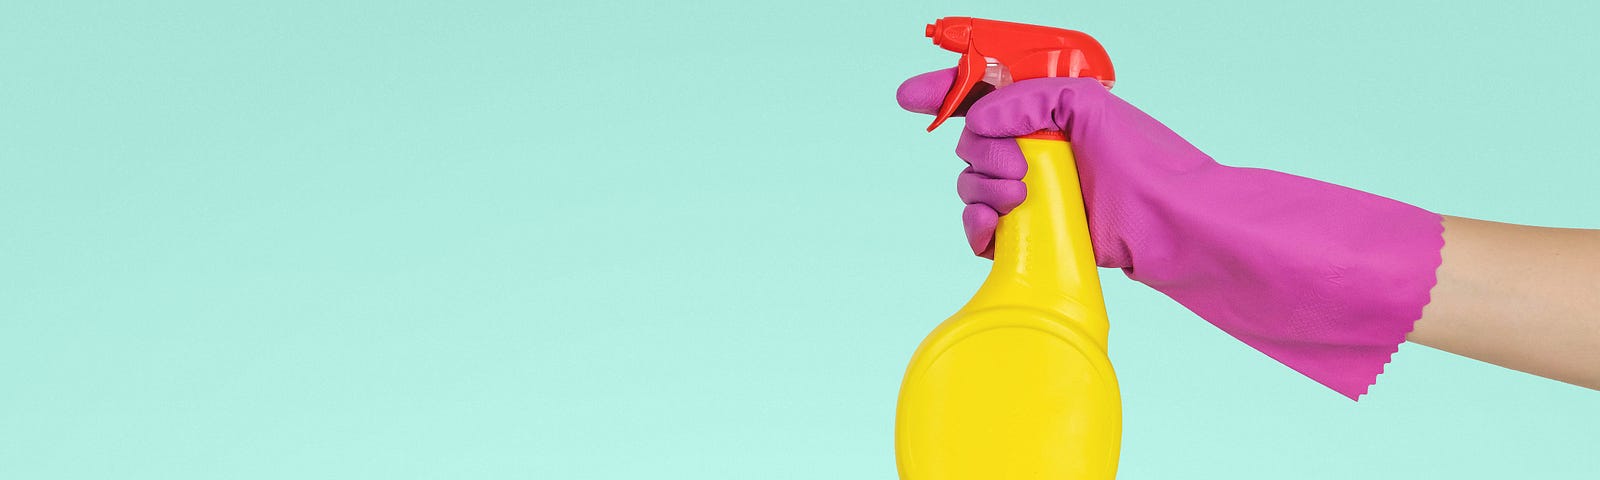 Hand in pink rubber glove holding yellow bottle of cleaning spray